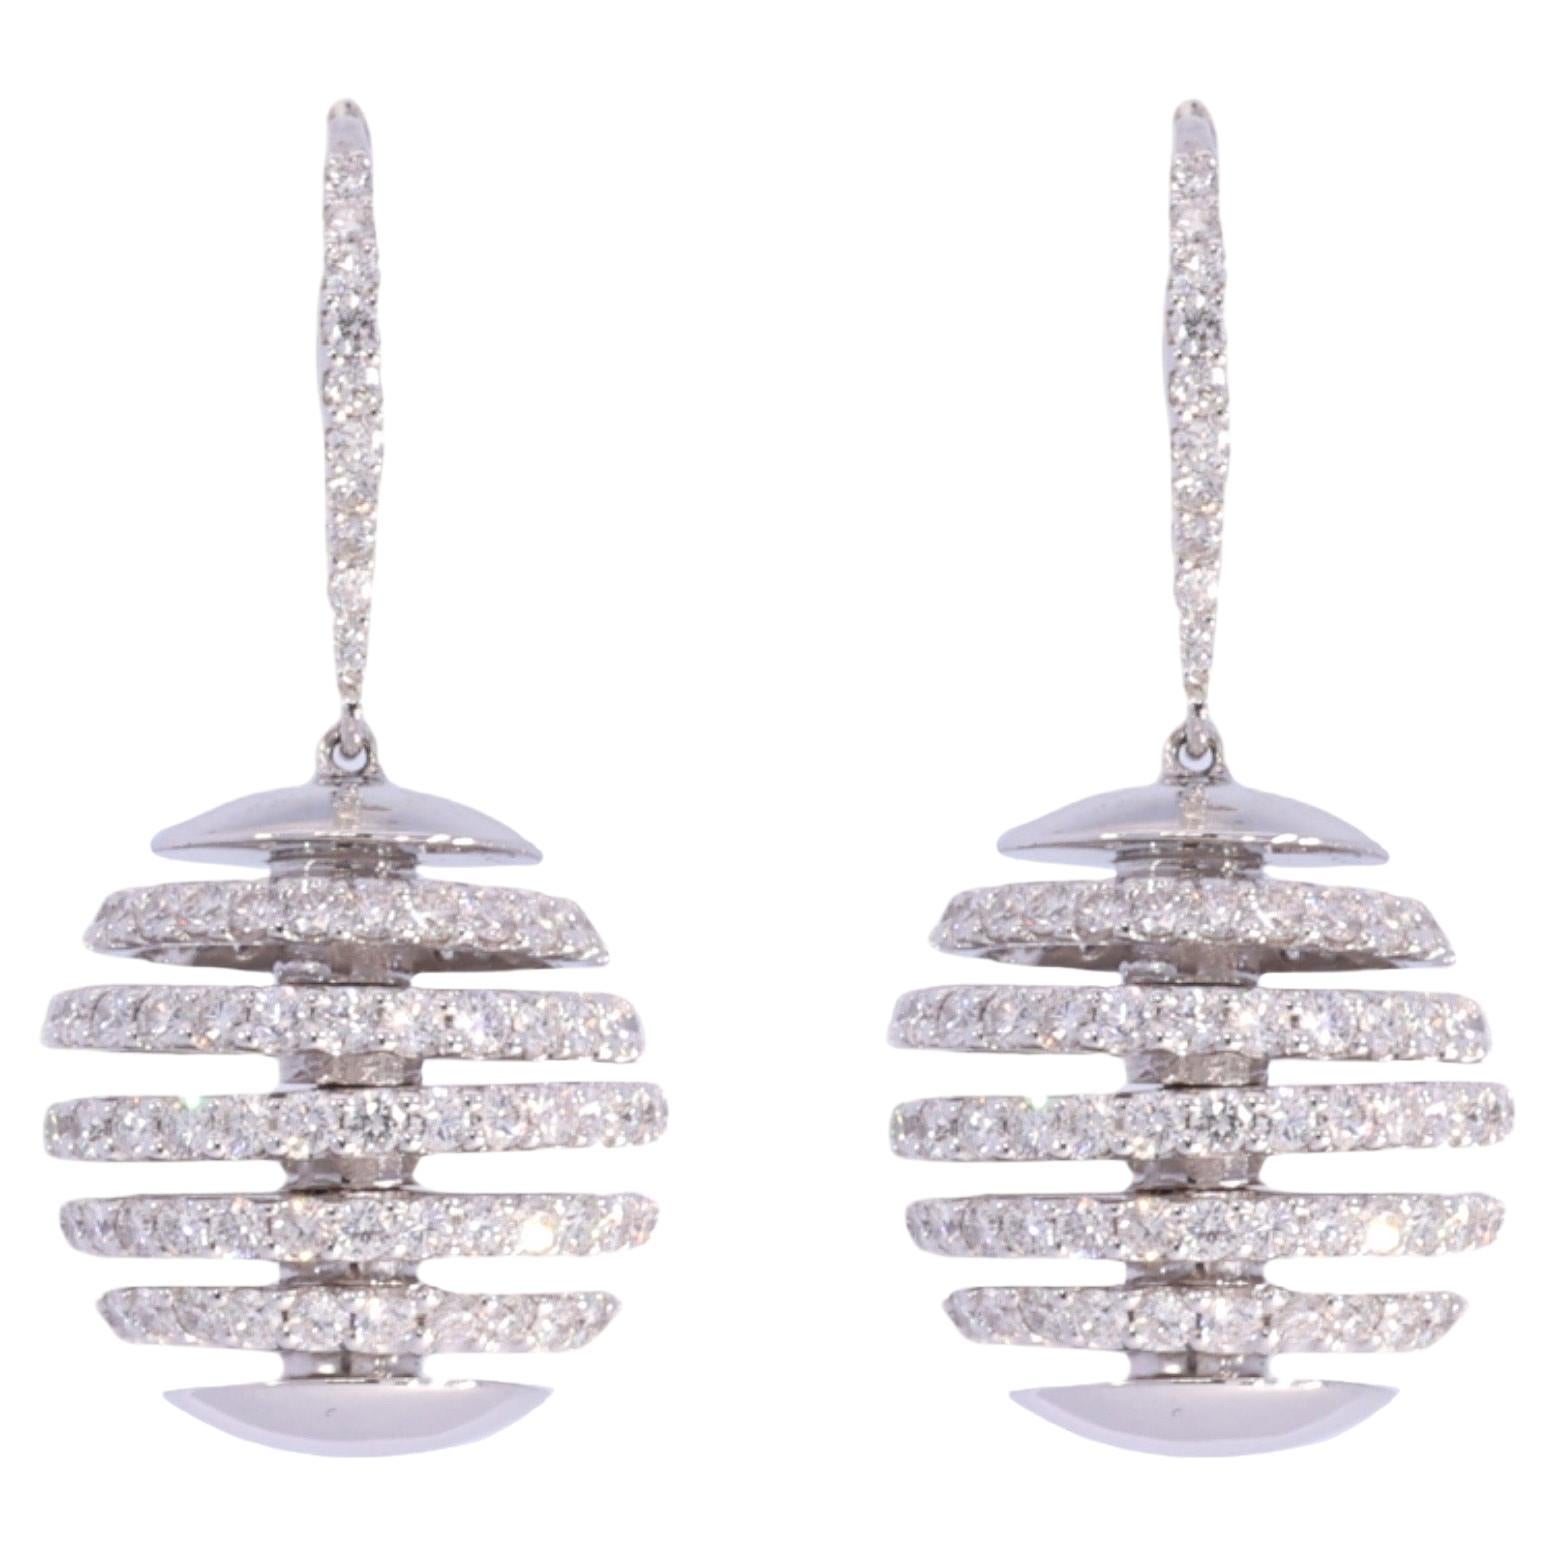 Gorgeous Dangling 18kt White Gold Earrings with  5.4 ct Brilliant Cut Diamonds

Material: 18 kt. white gold

Diamonds: white brilliant cut diamonds 2.7 ct. diamonds on each earrings, together 5.4 ct. 

Measurements: 35 mm x 16.8 mm x 15.9 mm

Total